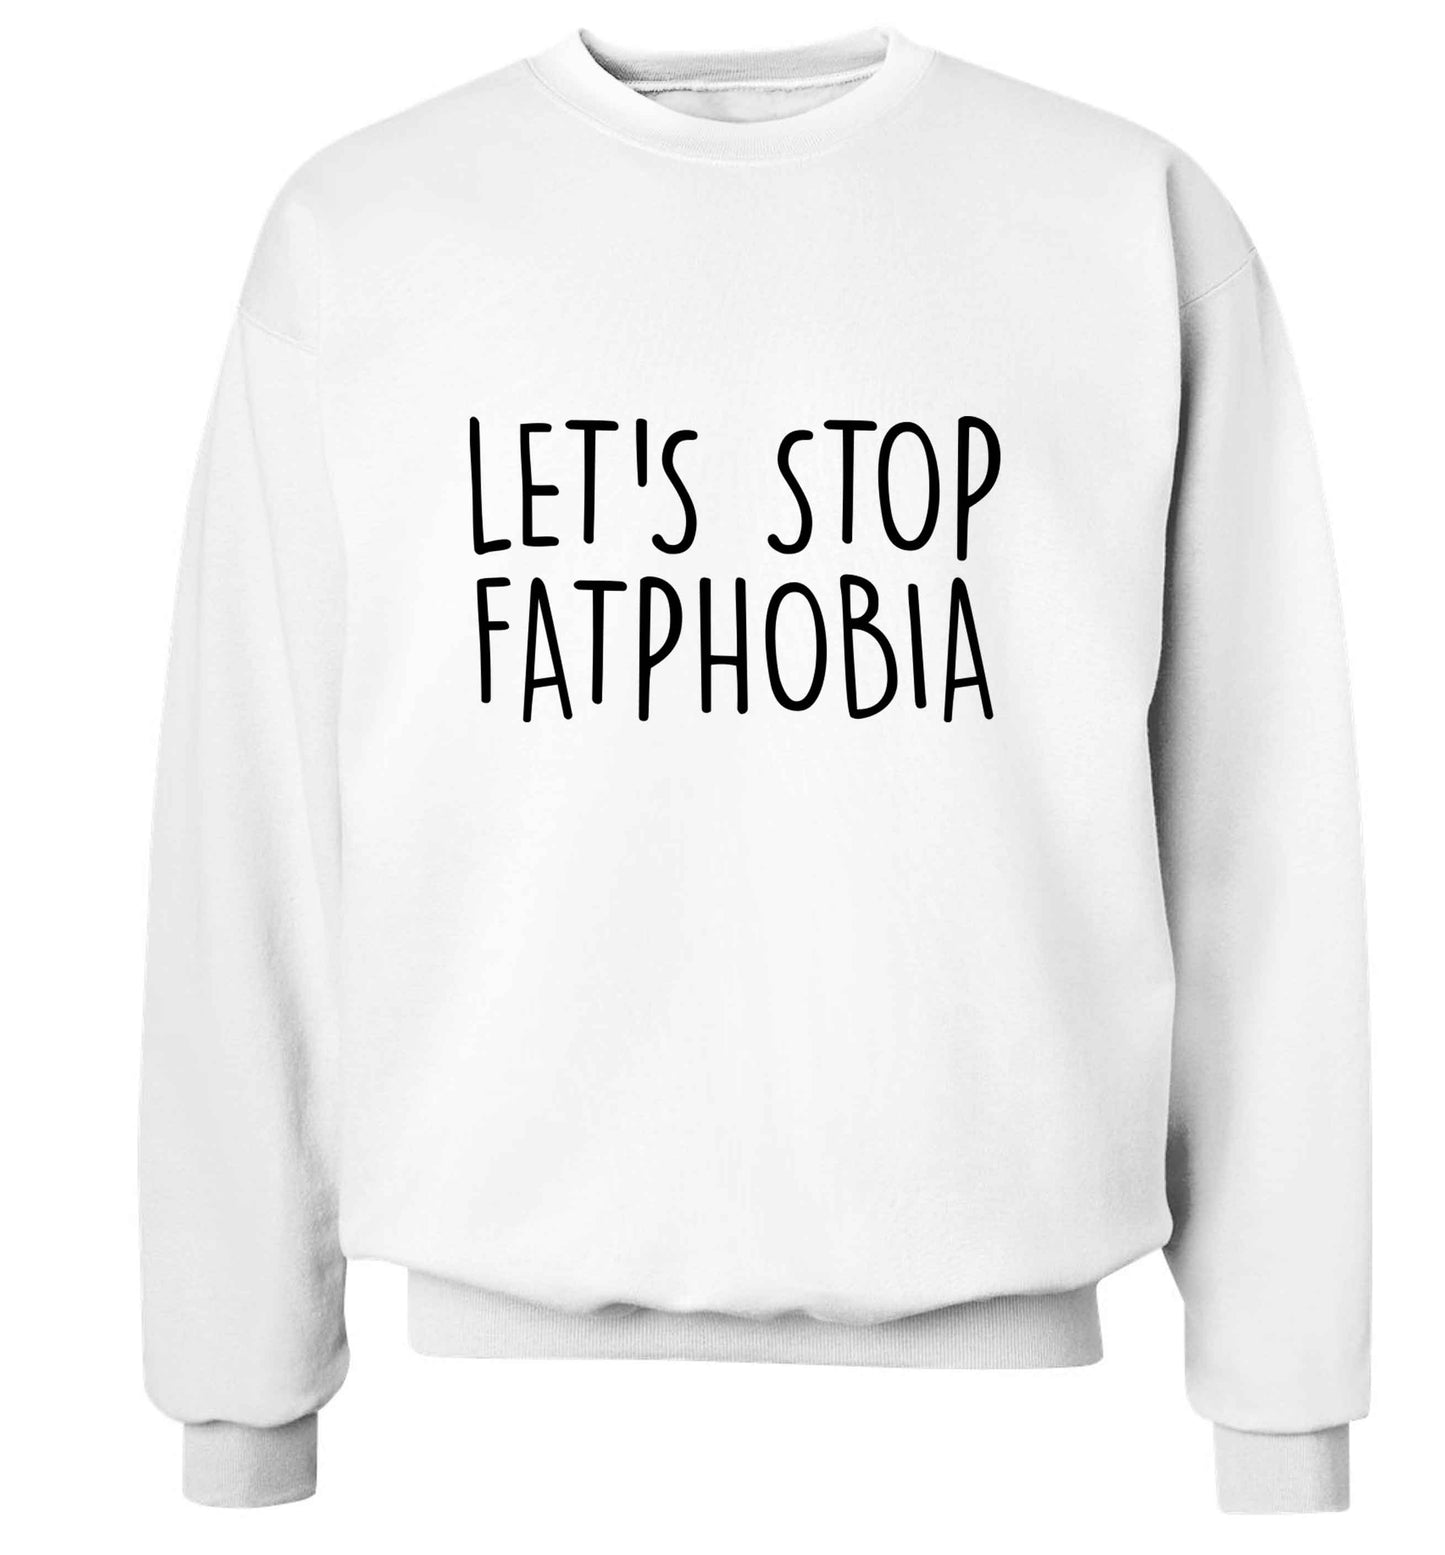 Let's stop fatphobia adult's unisex white sweater 2XL